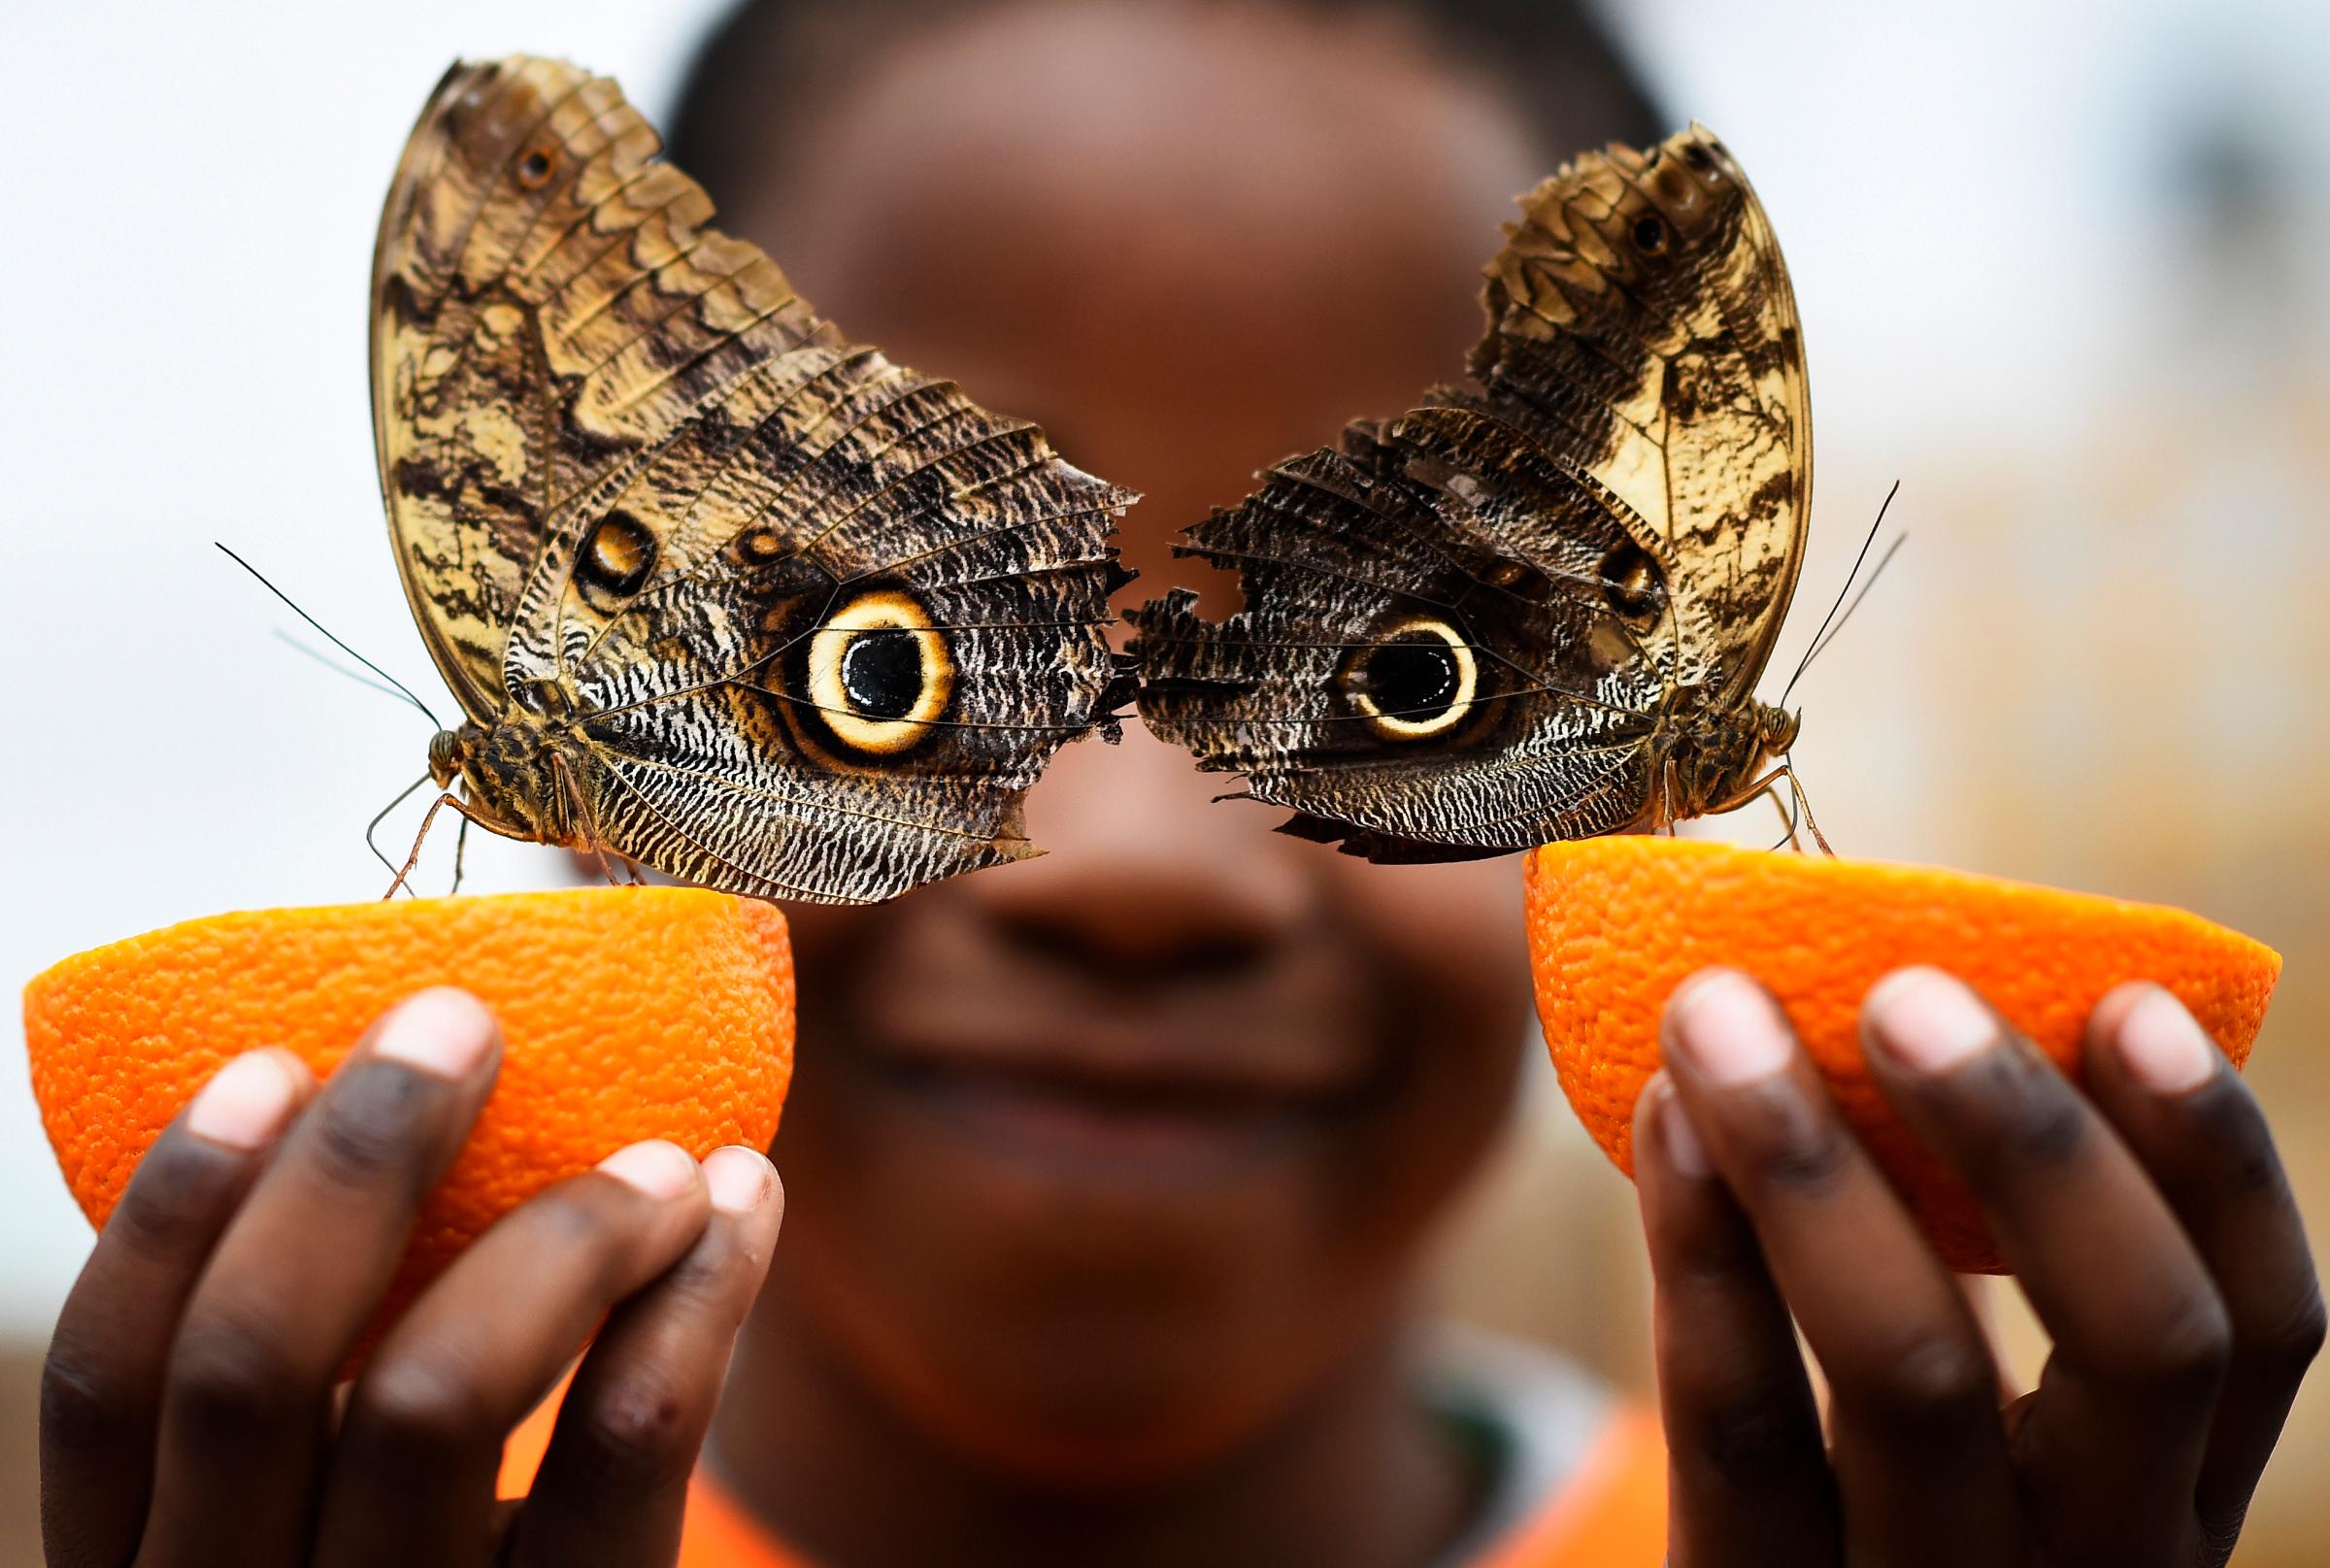 Bjorn, aged 5, smiles as he poses with a owl butterfly during an event to launch the Sensational Butterflies exhibition at the Natural History Museum in London, on March 23, 2016.